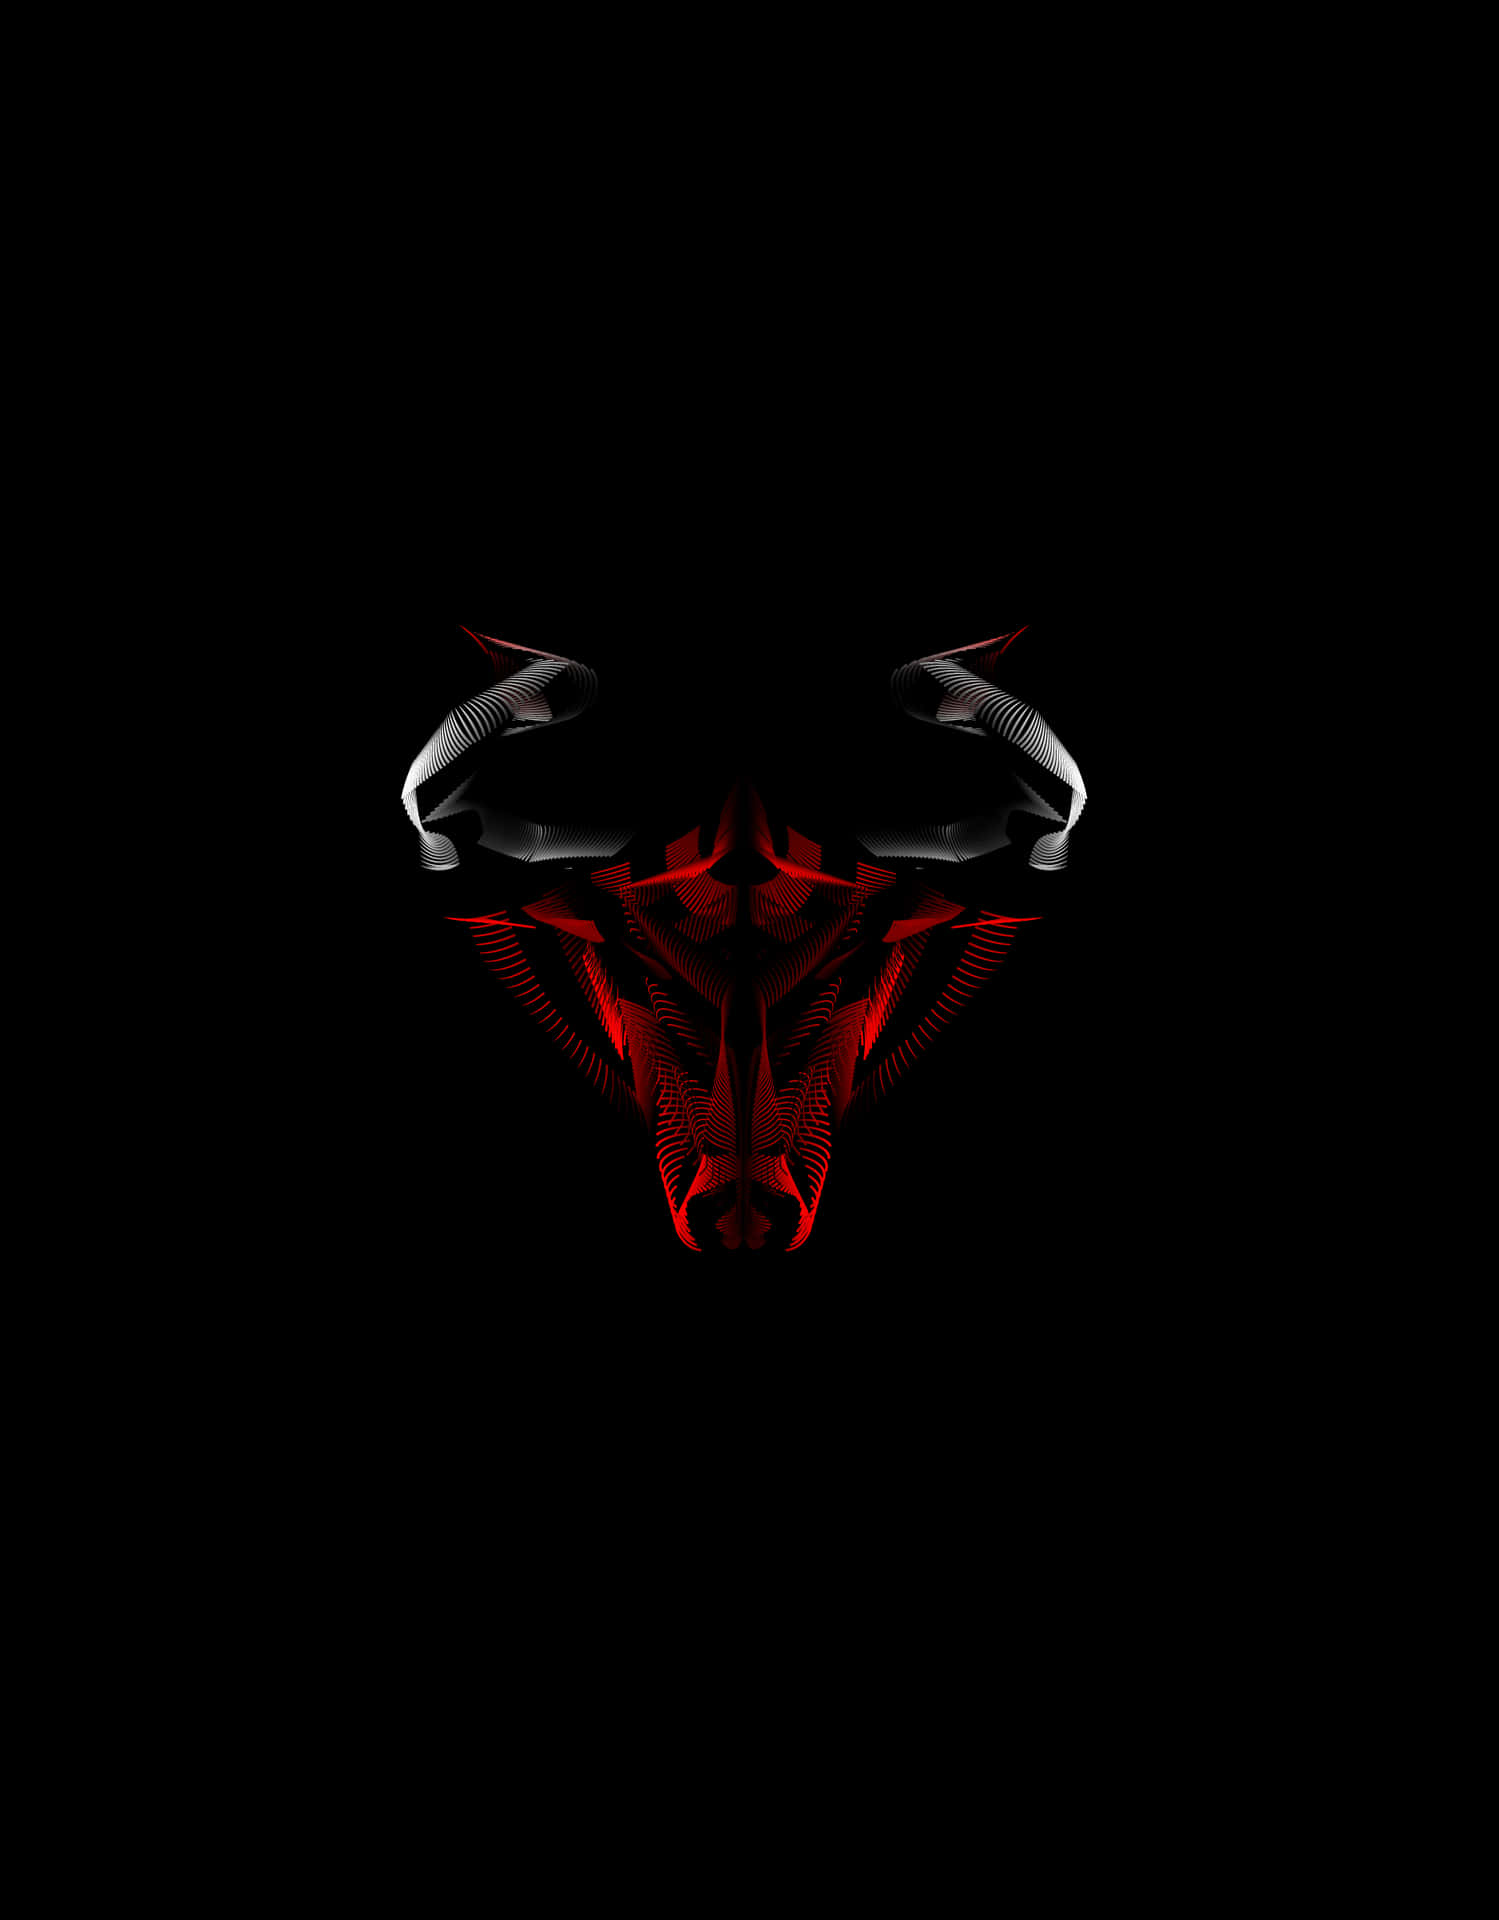 Rock The Red And White With A Chicago Bulls iPhone Wallpaper